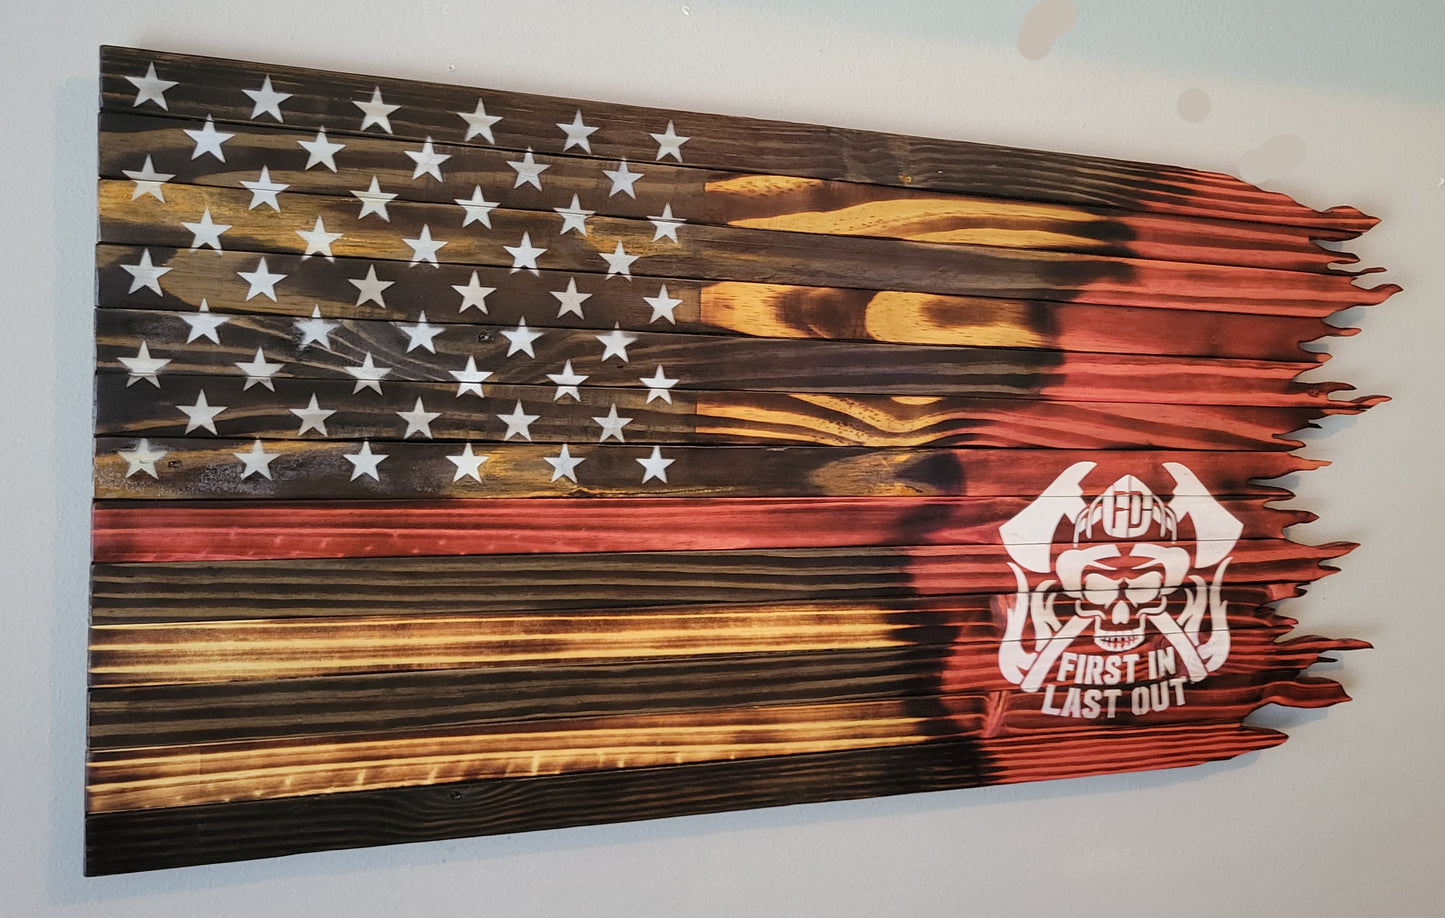 Firefighter "First In Last Out" Wooden American Flag with Jagged Edge